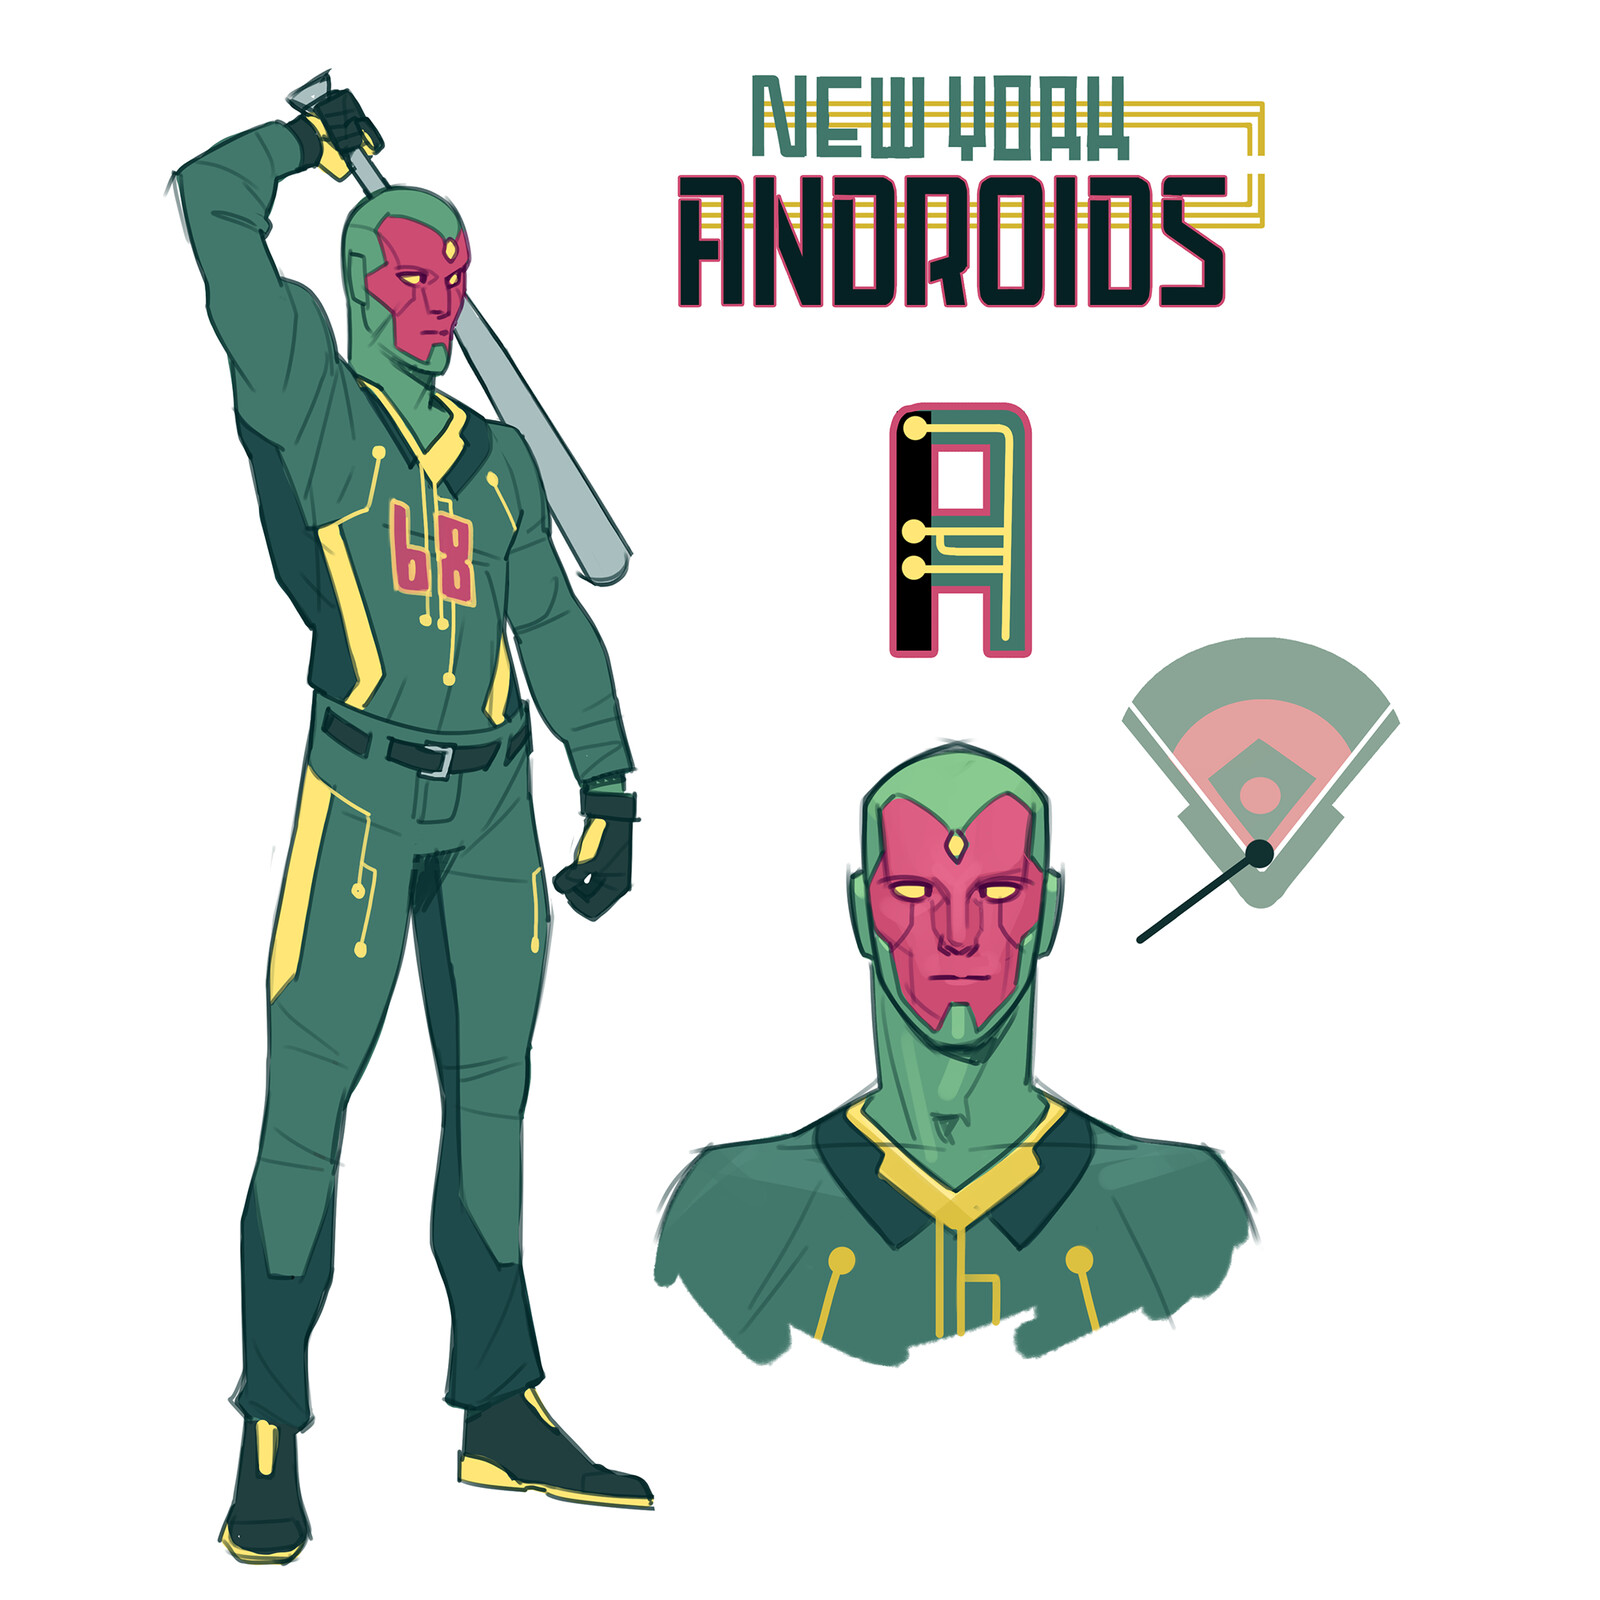 The New York Androids!